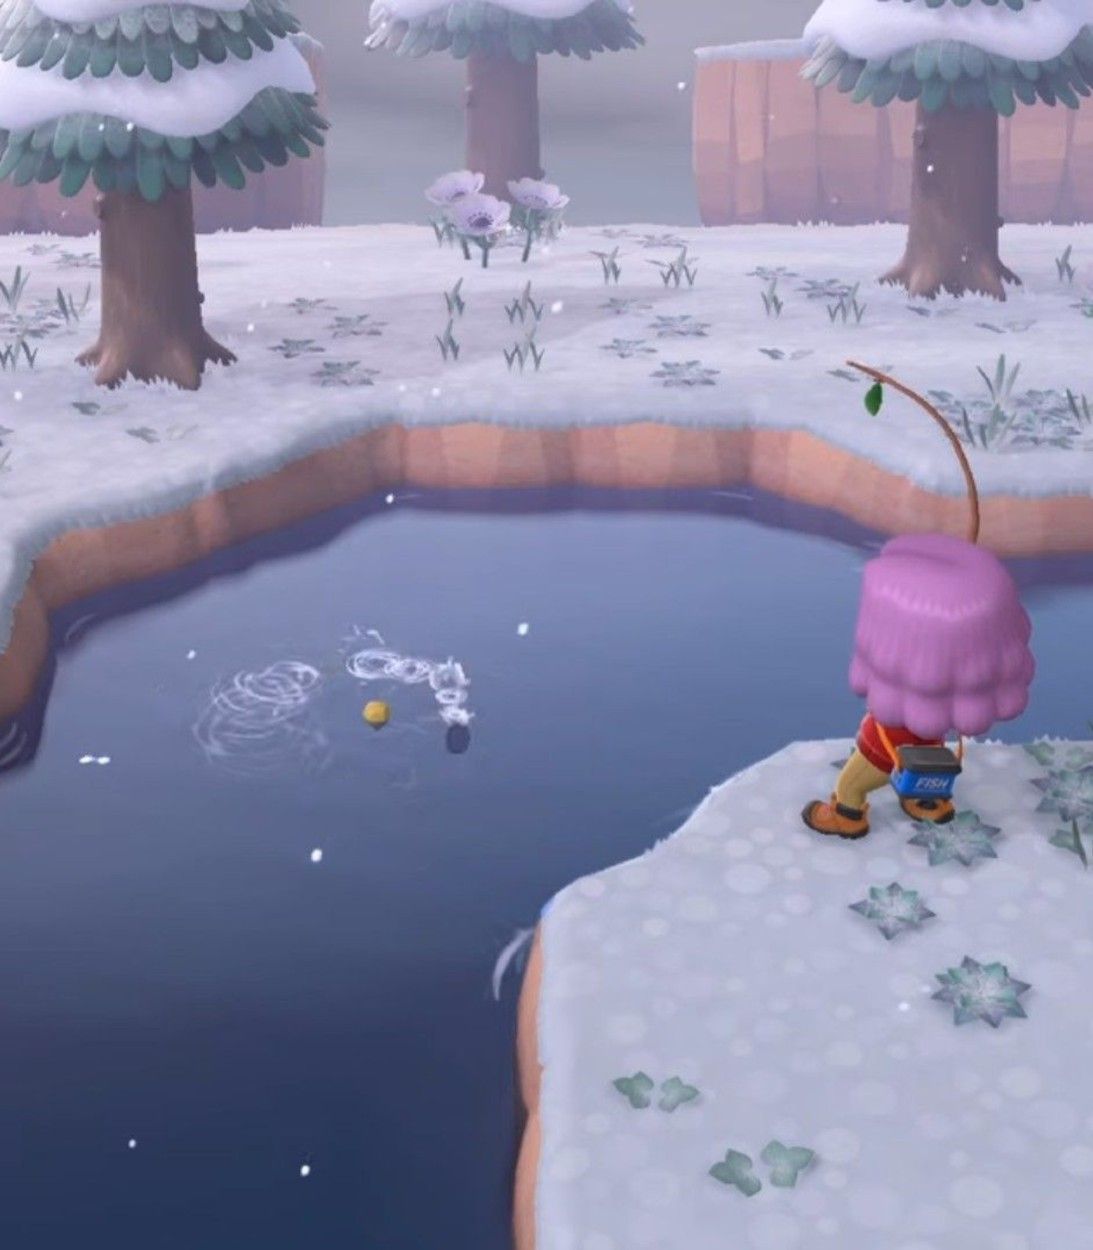 A player fishes in the river off a snowy bank in Animal Crossing: New Horizons